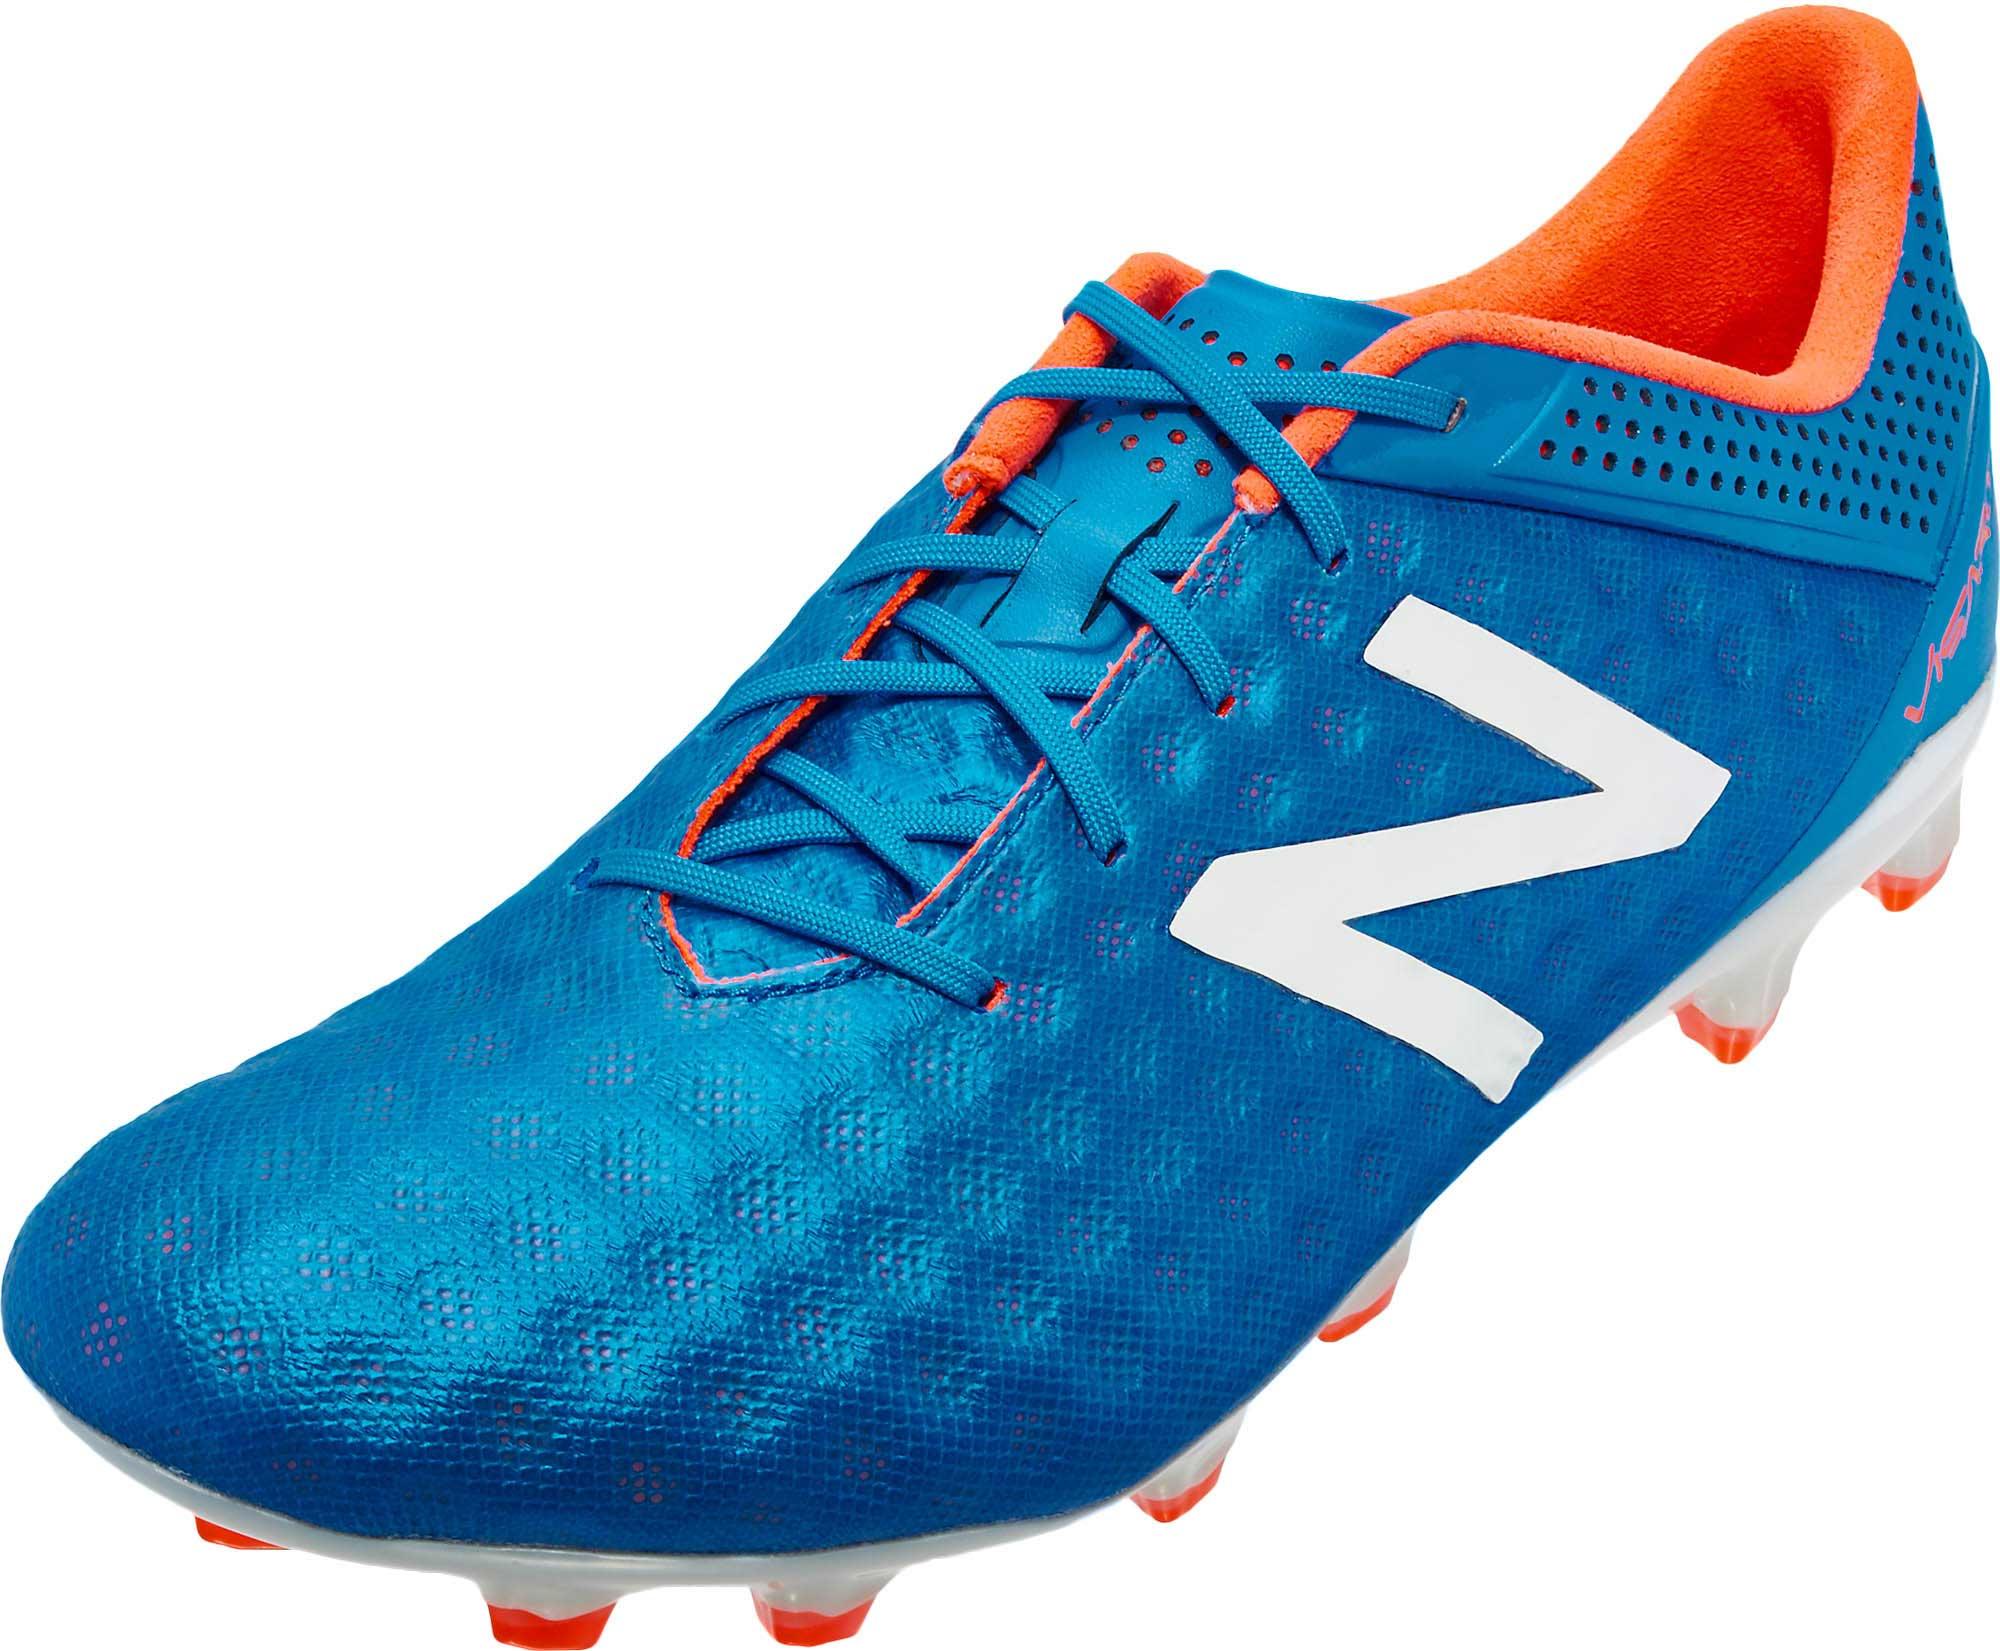 Wide New Balance FG Soccer Cleats